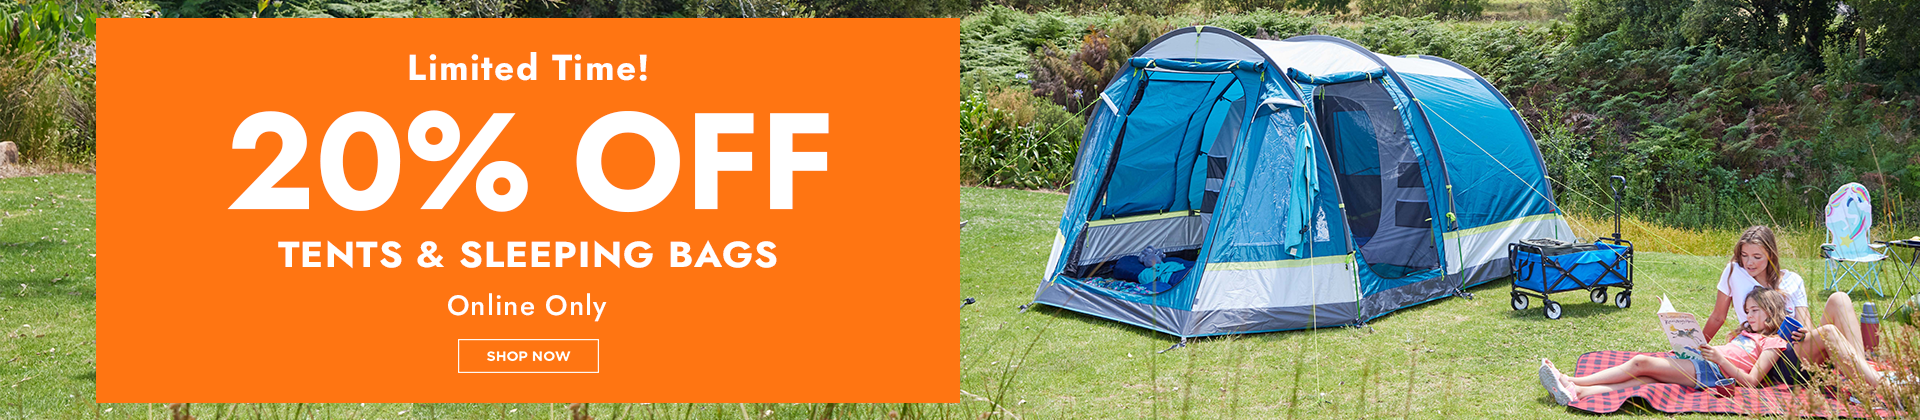 H1: 20% Off Tents & SLE